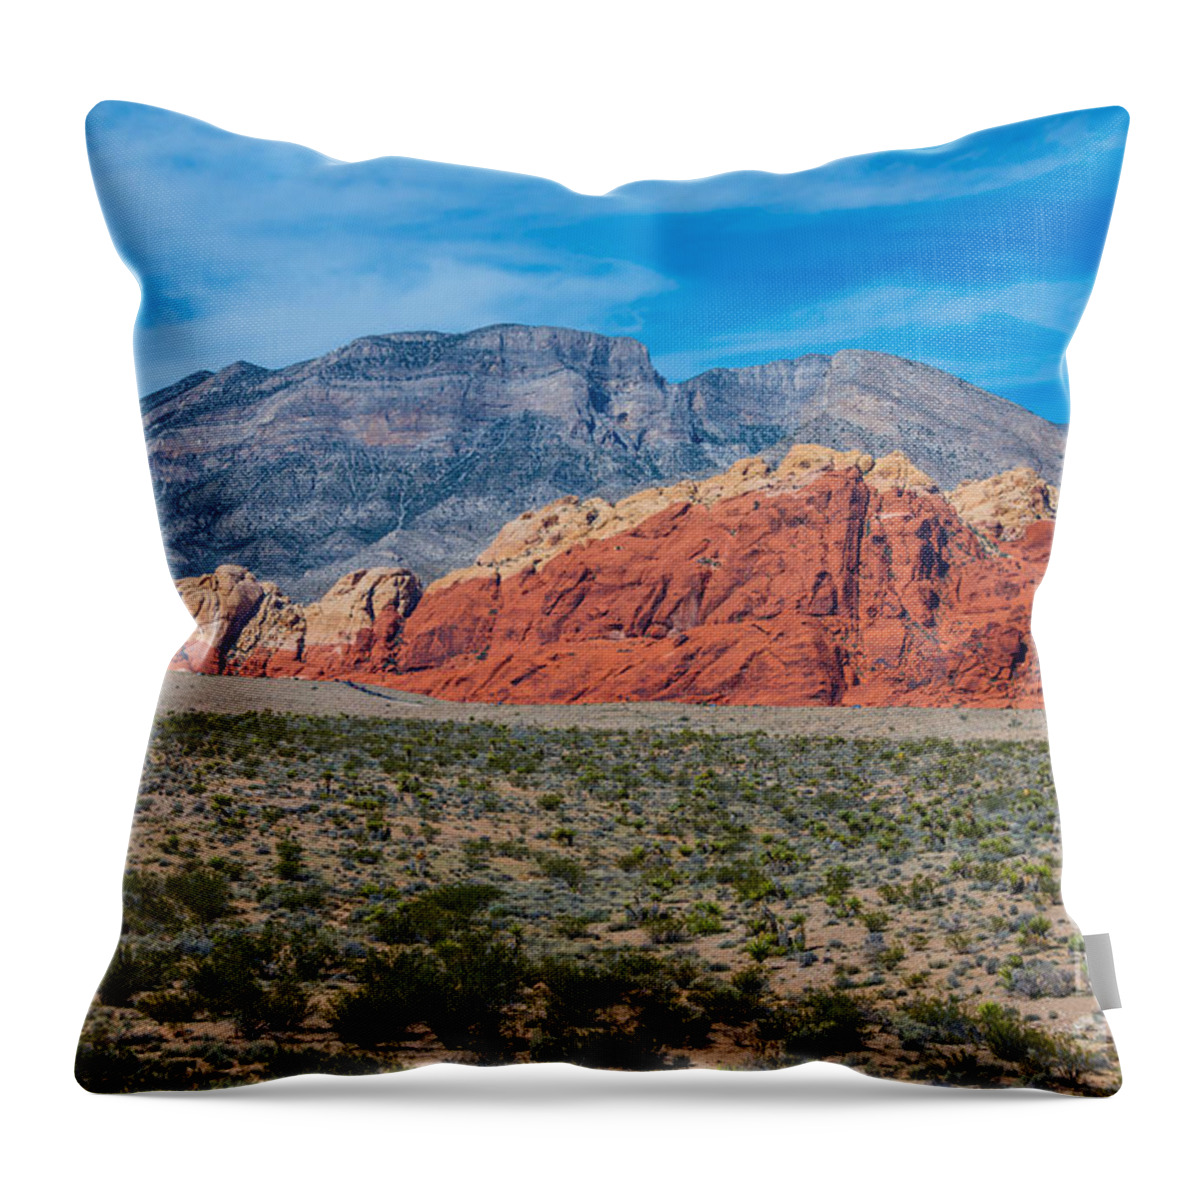  Red Rock Canyon Throw Pillow featuring the photograph Red Rock Canyon by Anthony Sacco